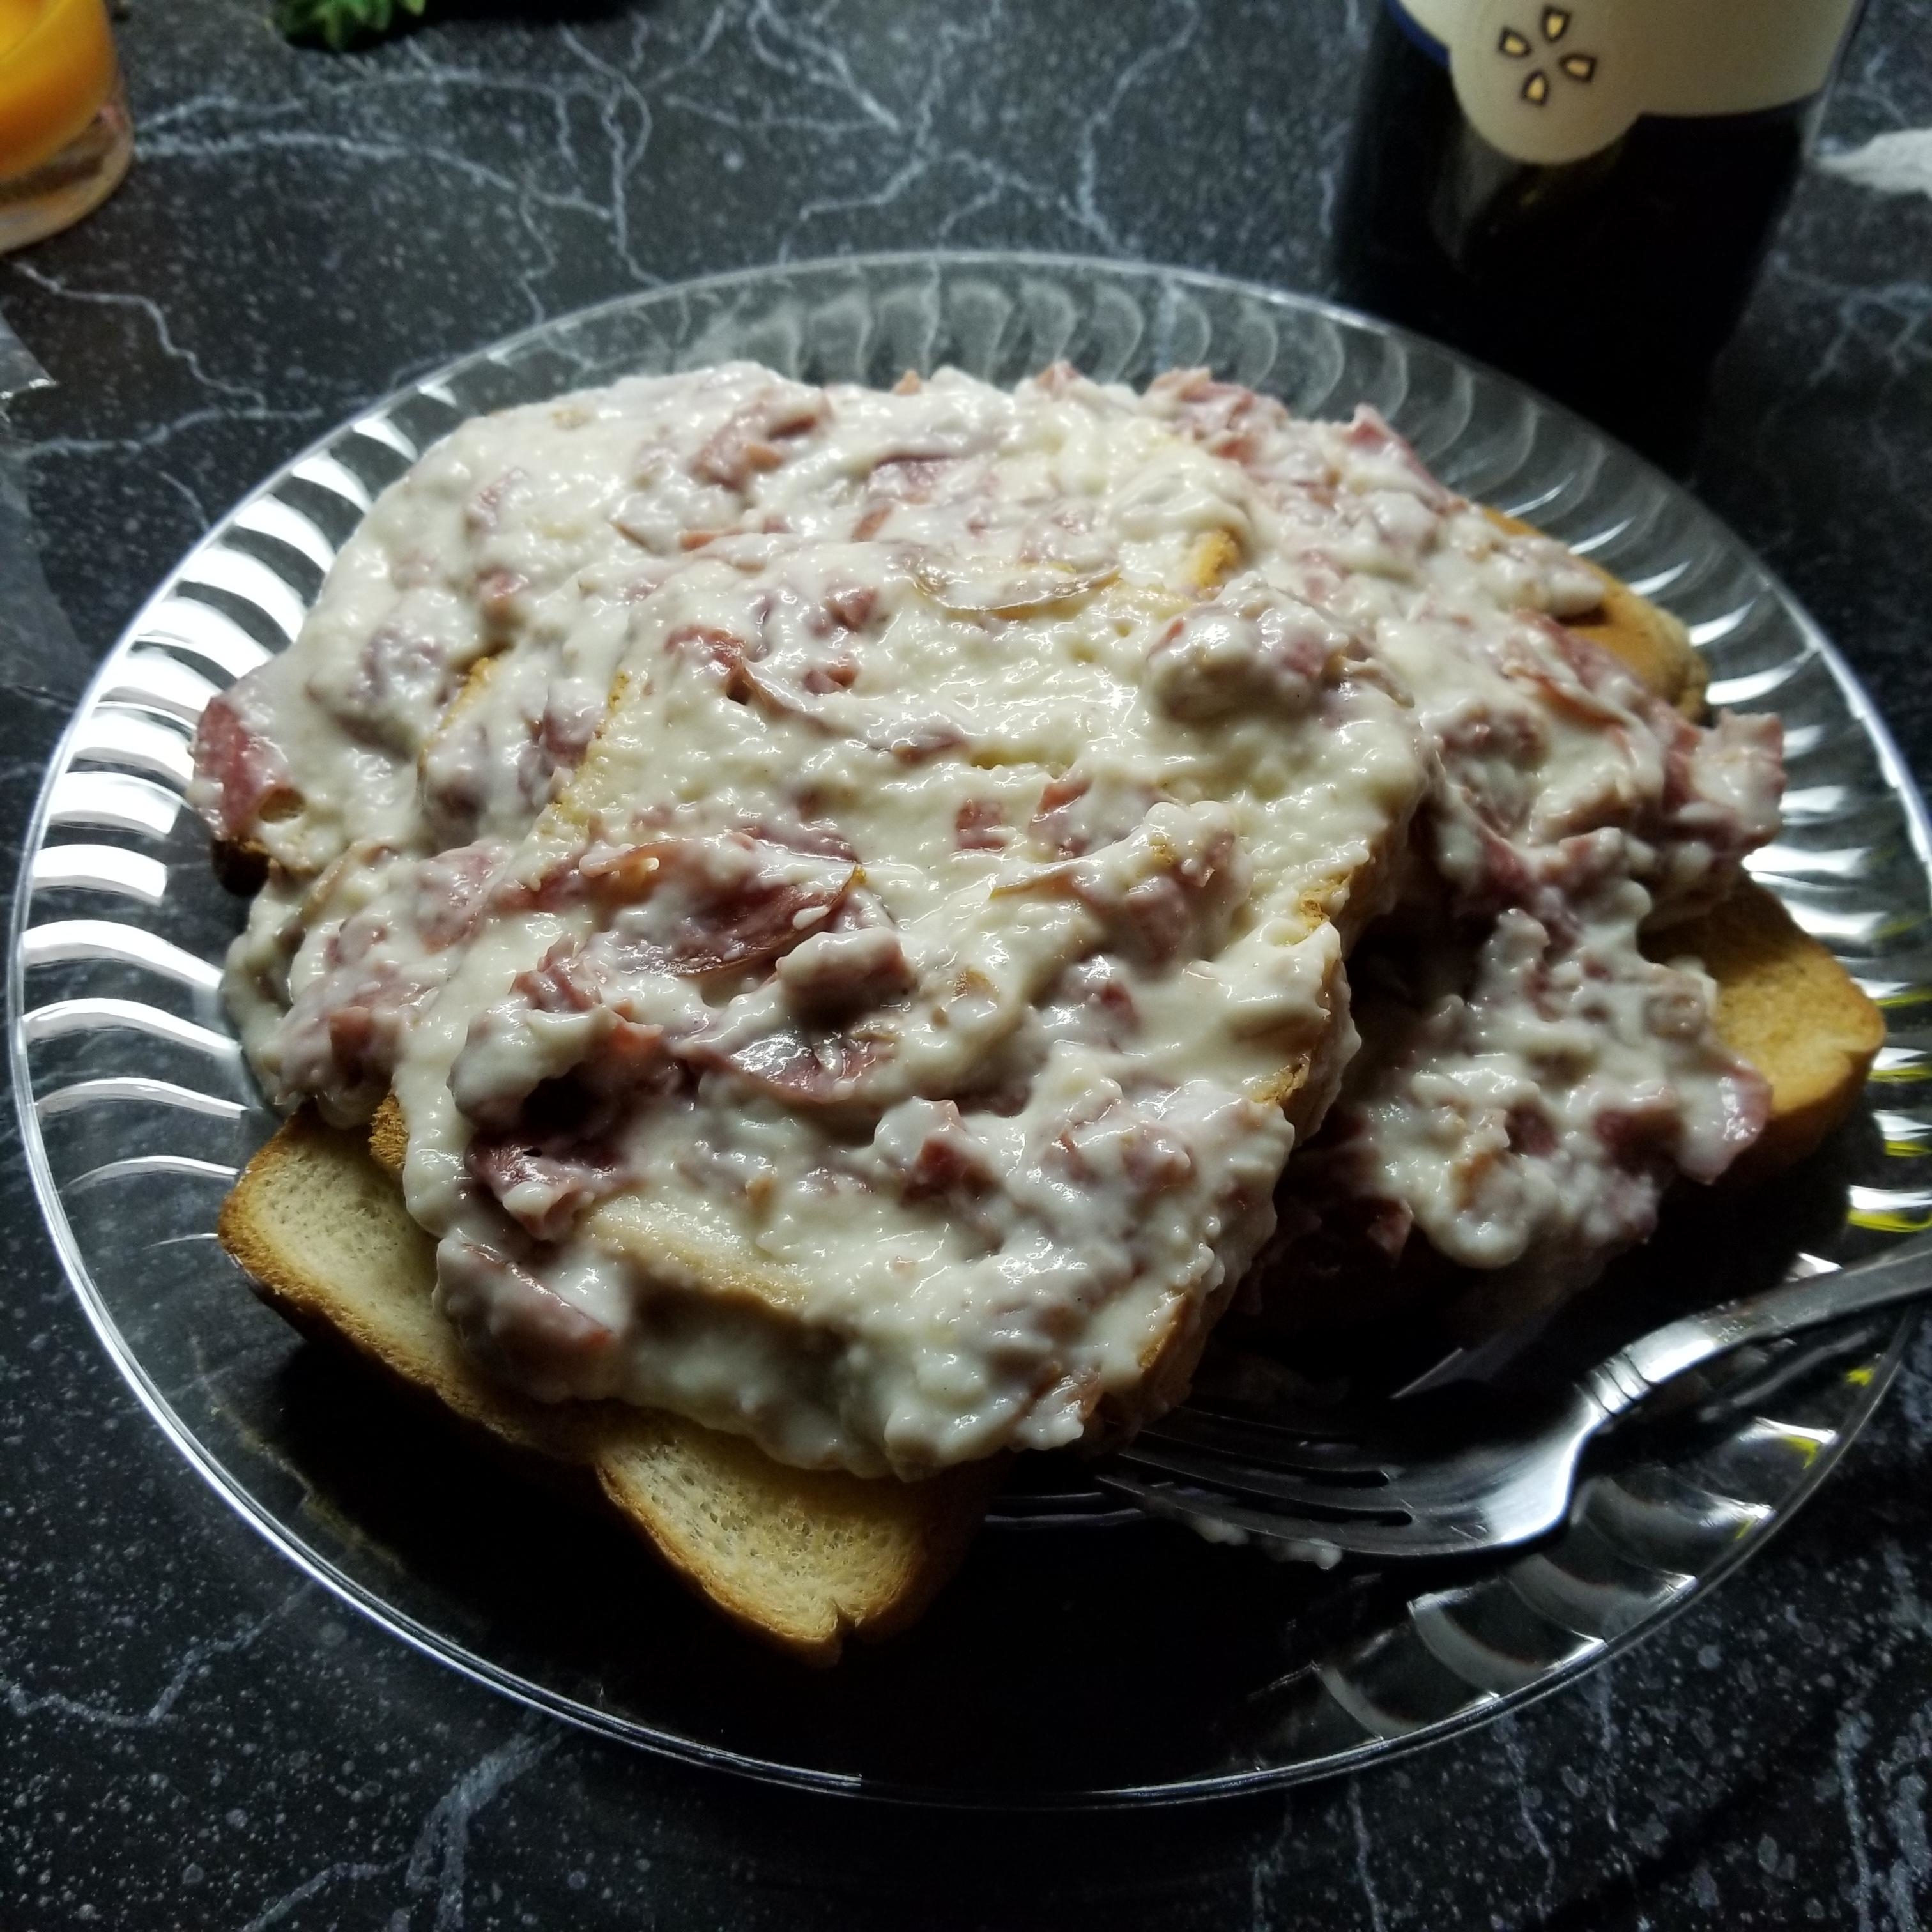 Cream chopped beef over two slices of white toast